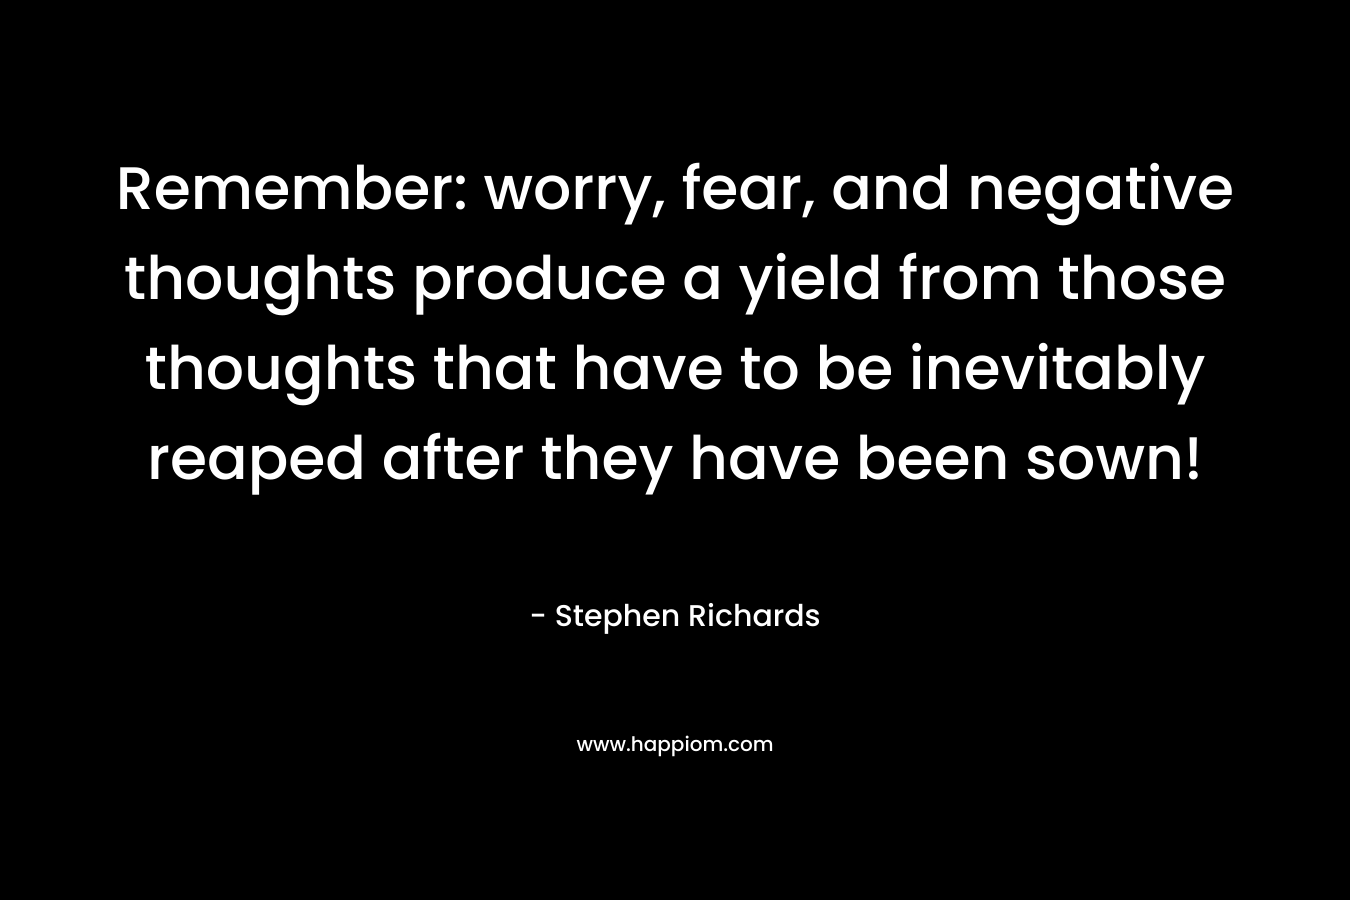 Remember: worry, fear, and negative thoughts produce a yield from those thoughts that have to be inevitably reaped after they have been sown! – Stephen Richards